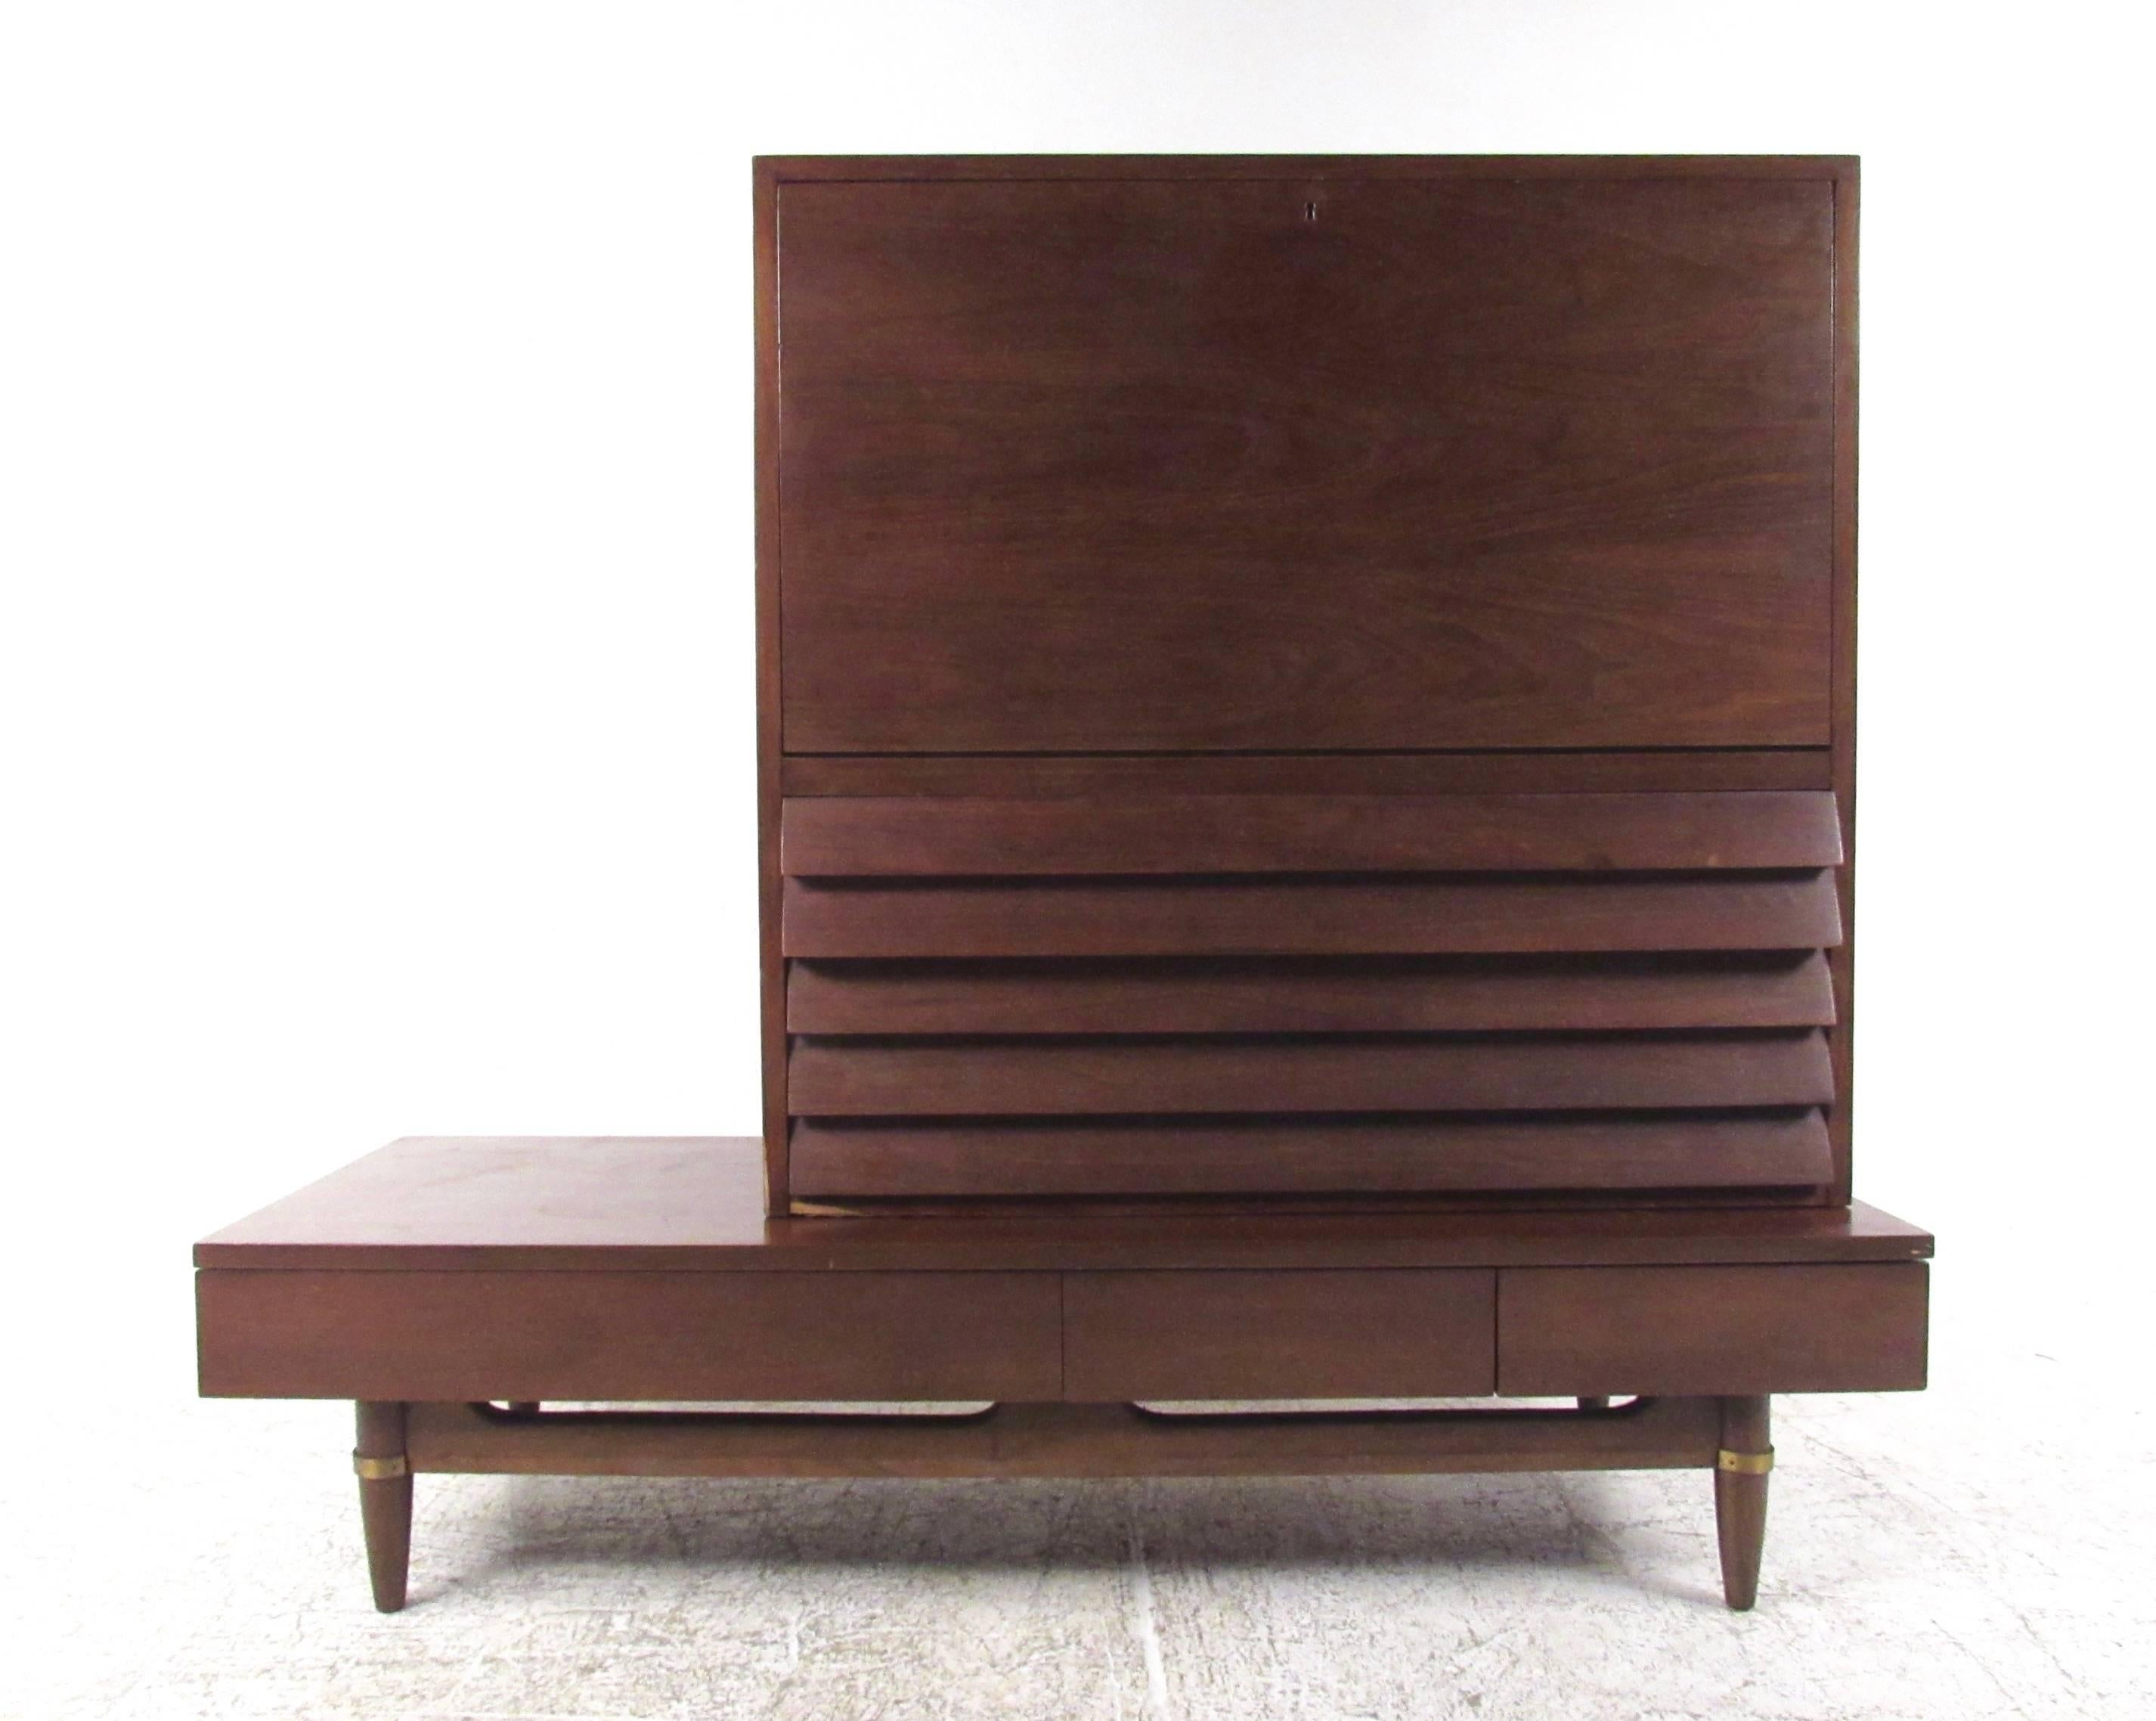 This unique two-piece vintage dresser features a rich walnut finish, louvered front cabinet and unique brass trim. This well made Mid-Century American of Martinsville storage piece features a variety of drawers combined with drop front cabinet for